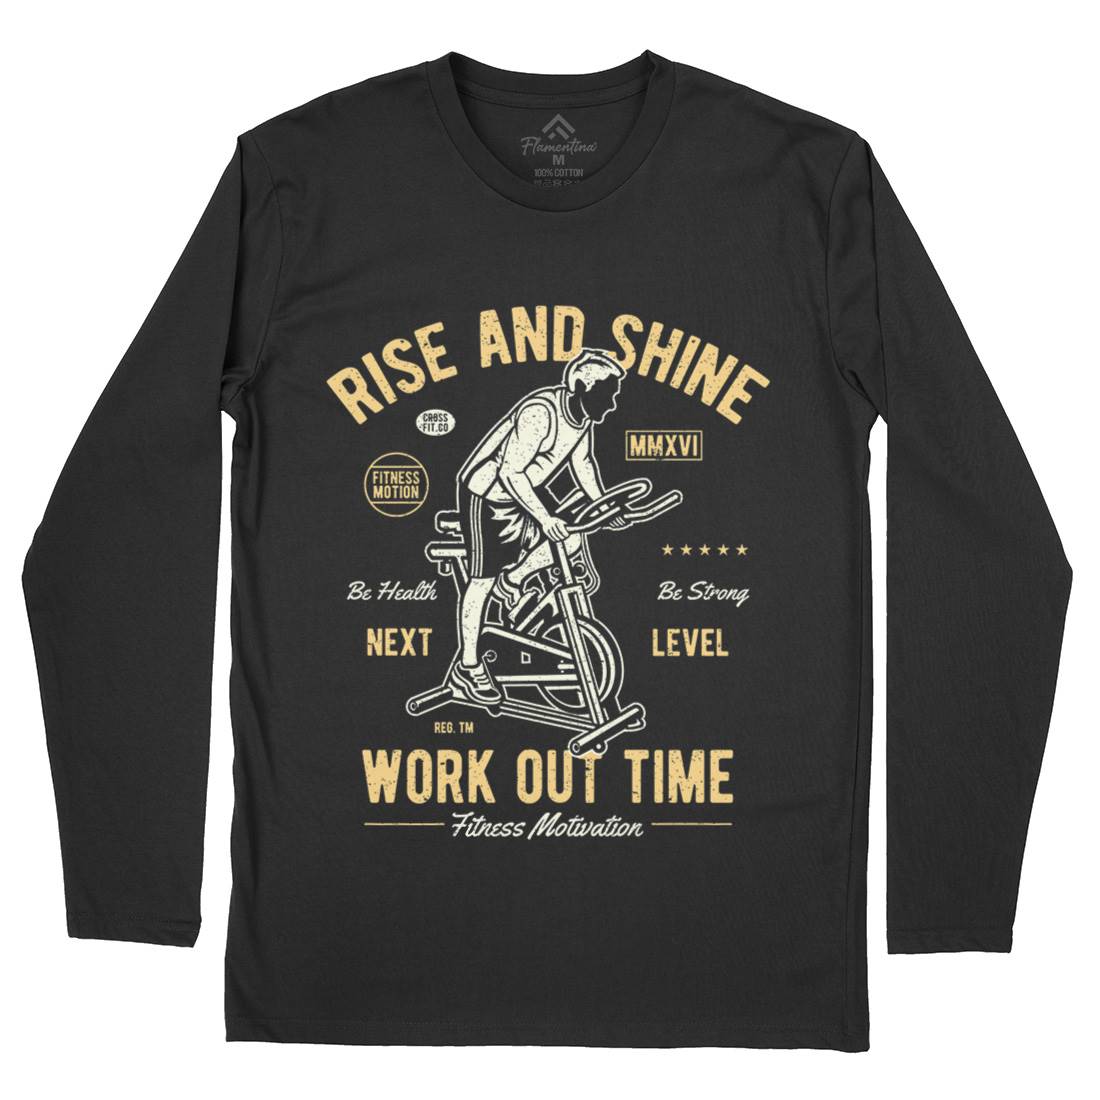 Work Out Time Mens Long Sleeve T-Shirt Gym A199